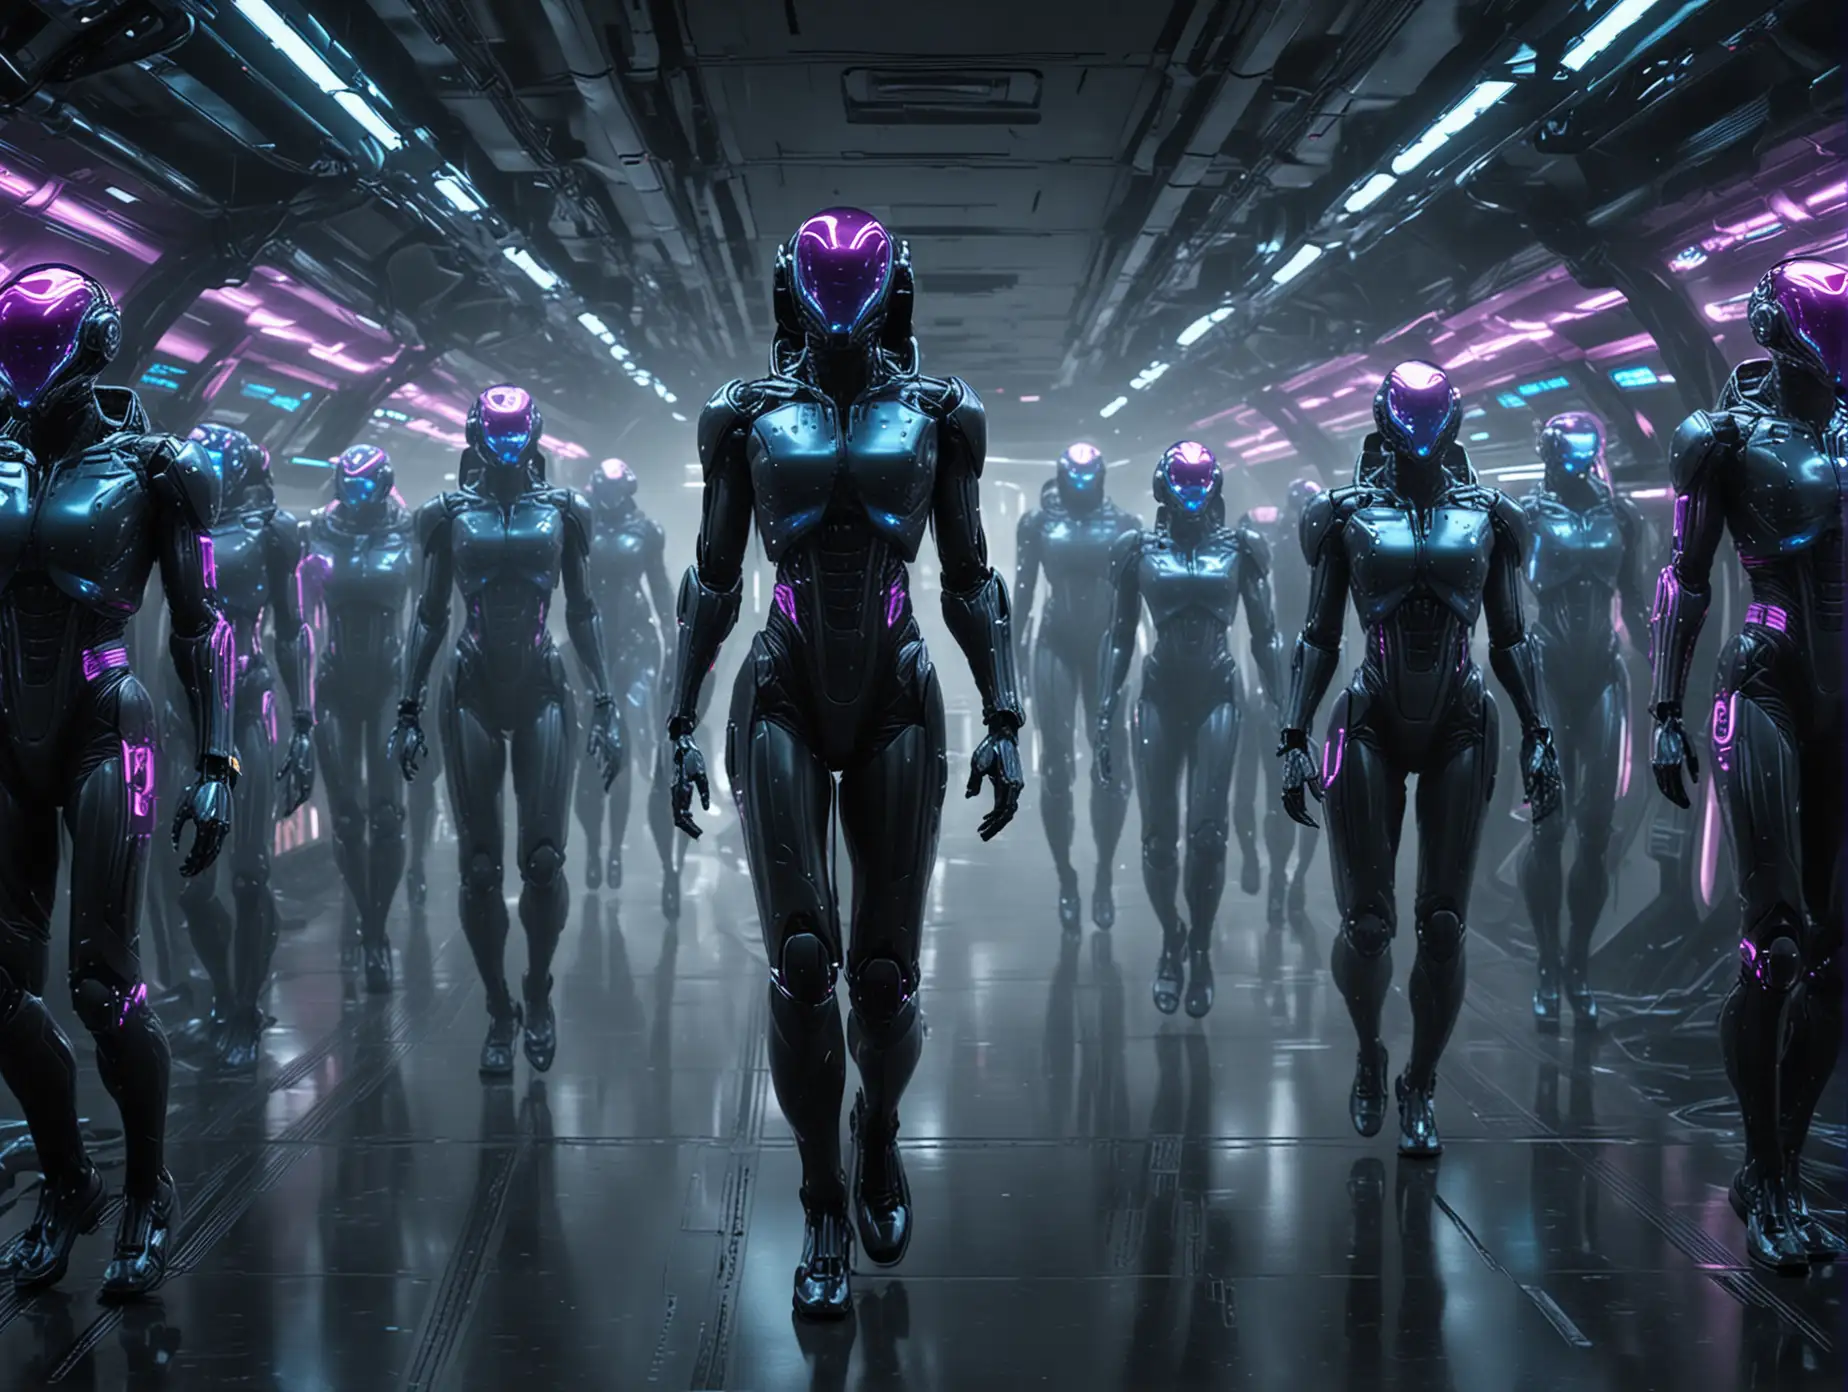 Generate a picture of a number of cyborg humans in slick black space suits in suspended animation aboard an alien space ship. The picture should have a blue and magenta neon color theme.